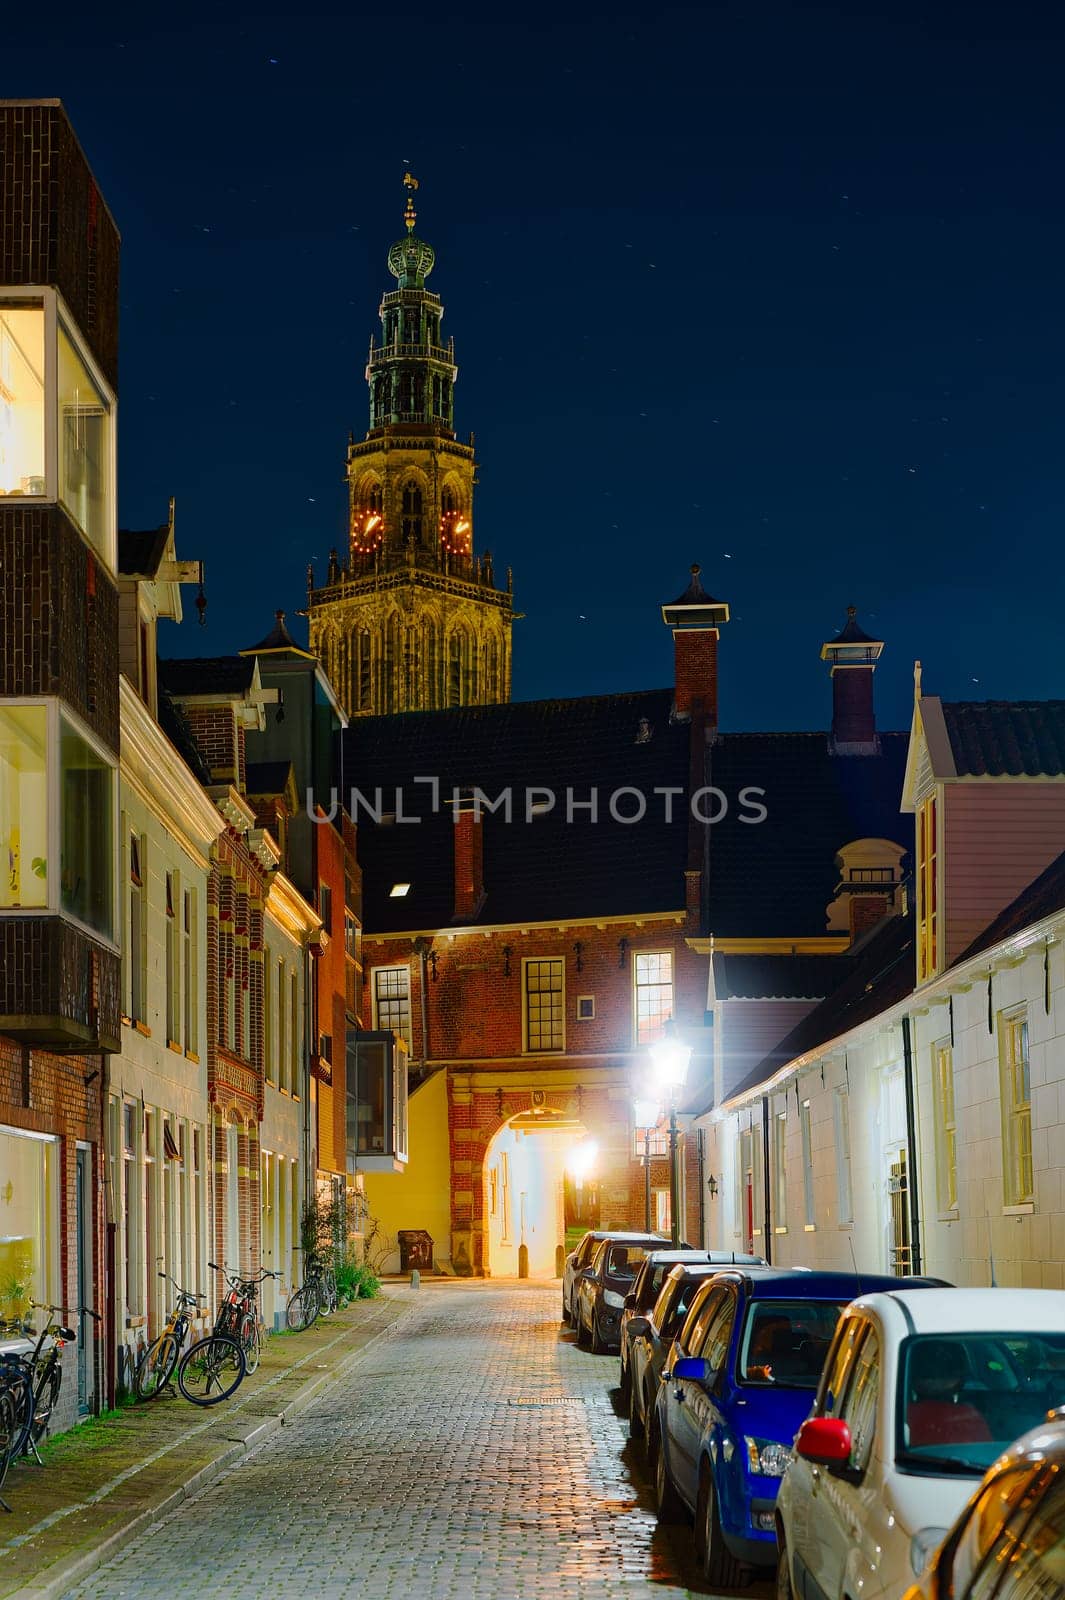 Groningen, Netherlands night Cityscape photographed at night. Groningen during a clear evening in autumn, summer. City centre of Groningen Netherlands at night